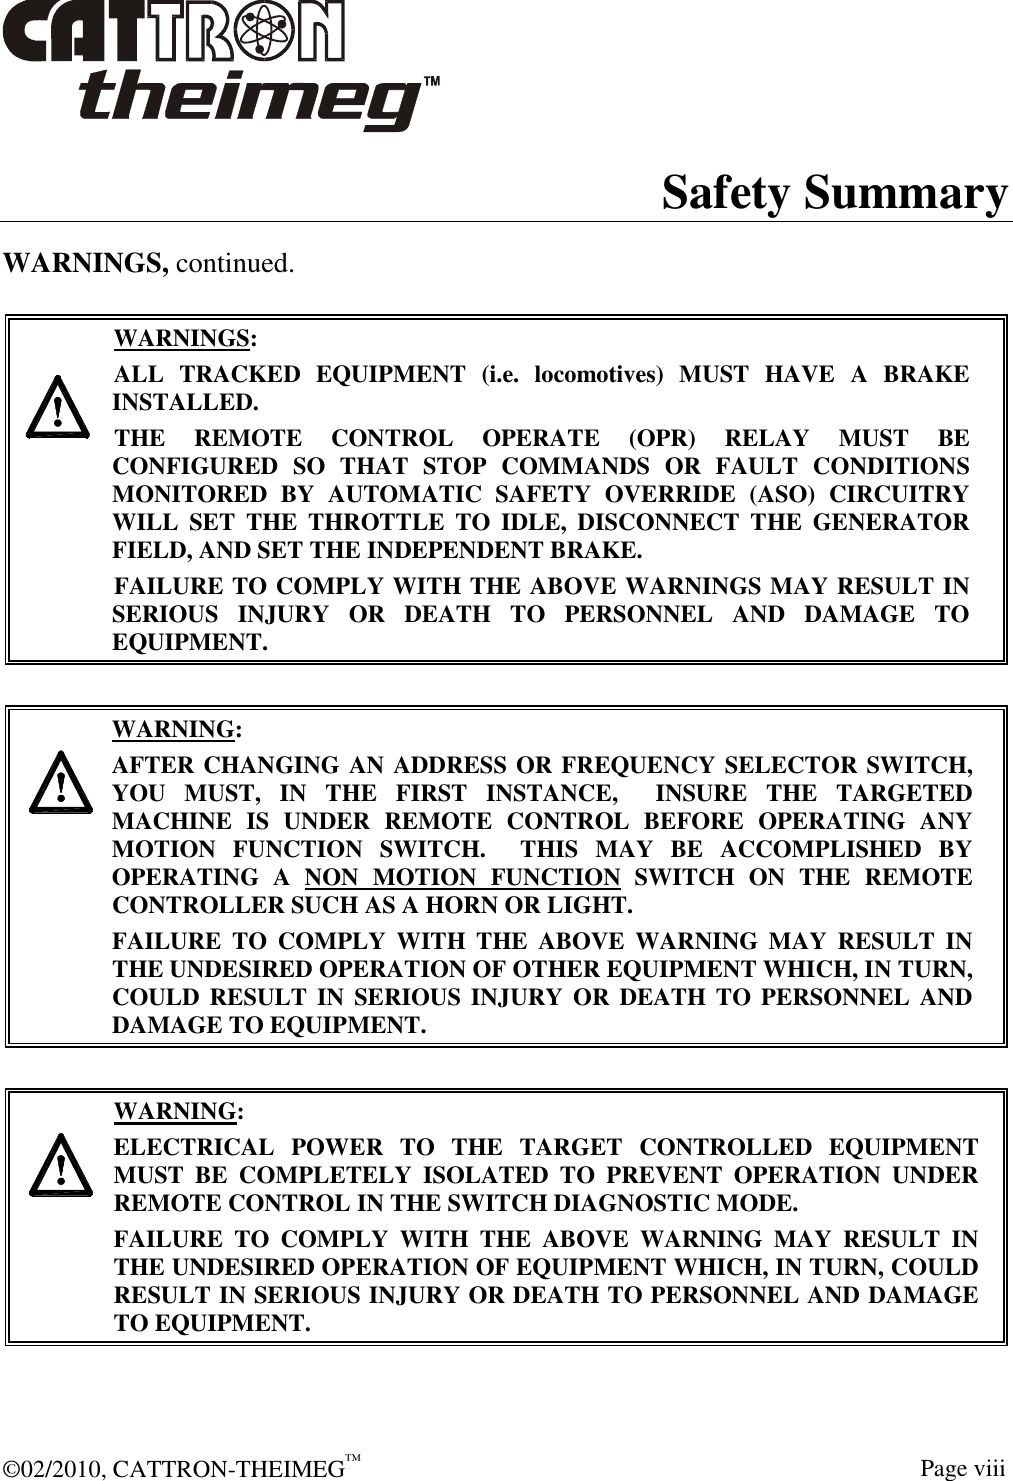  ©02/2010, CATTRON-THEIMEG™     Page viii Safety Summary WARNINGS, continued.      WARNINGS: ALL  TRACKED  EQUIPMENT  (i.e.  locomotives)  MUST  HAVE  A  BRAKE INSTALLED. THE  REMOTE  CONTROL  OPERATE  (OPR)  RELAY  MUST  BE CONFIGURED  SO  THAT  STOP  COMMANDS  OR  FAULT  CONDITIONS MONITORED  BY  AUTOMATIC  SAFETY  OVERRIDE  (ASO)  CIRCUITRY WILL  SET  THE  THROTTLE  TO  IDLE,  DISCONNECT  THE  GENERATOR FIELD, AND SET THE INDEPENDENT BRAKE.  FAILURE TO COMPLY WITH THE ABOVE WARNINGS MAY RESULT IN SERIOUS  INJURY  OR  DEATH  TO  PERSONNEL  AND  DAMAGE  TO EQUIPMENT.       WARNING: AFTER CHANGING AN ADDRESS OR FREQUENCY SELECTOR SWITCH, YOU  MUST,  IN  THE  FIRST  INSTANCE,    INSURE  THE  TARGETED MACHINE  IS  UNDER  REMOTE  CONTROL  BEFORE  OPERATING  ANY MOTION  FUNCTION  SWITCH.    THIS  MAY  BE  ACCOMPLISHED  BY OPERATING  A  NON  MOTION  FUNCTION  SWITCH  ON  THE  REMOTE CONTROLLER SUCH AS A HORN OR LIGHT.  FAILURE  TO  COMPLY  WITH  THE  ABOVE  WARNING  MAY  RESULT  IN THE UNDESIRED OPERATION OF OTHER EQUIPMENT WHICH, IN TURN, COULD RESULT IN  SERIOUS  INJURY  OR  DEATH TO PERSONNEL  AND DAMAGE TO EQUIPMENT.       WARNING: ELECTRICAL  POWER  TO  THE  TARGET  CONTROLLED  EQUIPMENT MUST  BE  COMPLETELY  ISOLATED  TO  PREVENT  OPERATION  UNDER REMOTE CONTROL IN THE SWITCH DIAGNOSTIC MODE.  FAILURE  TO  COMPLY  WITH  THE  ABOVE  WARNING  MAY  RESULT  IN THE UNDESIRED OPERATION OF EQUIPMENT WHICH, IN TURN, COULD RESULT IN SERIOUS INJURY OR DEATH TO PERSONNEL AND DAMAGE TO EQUIPMENT.   